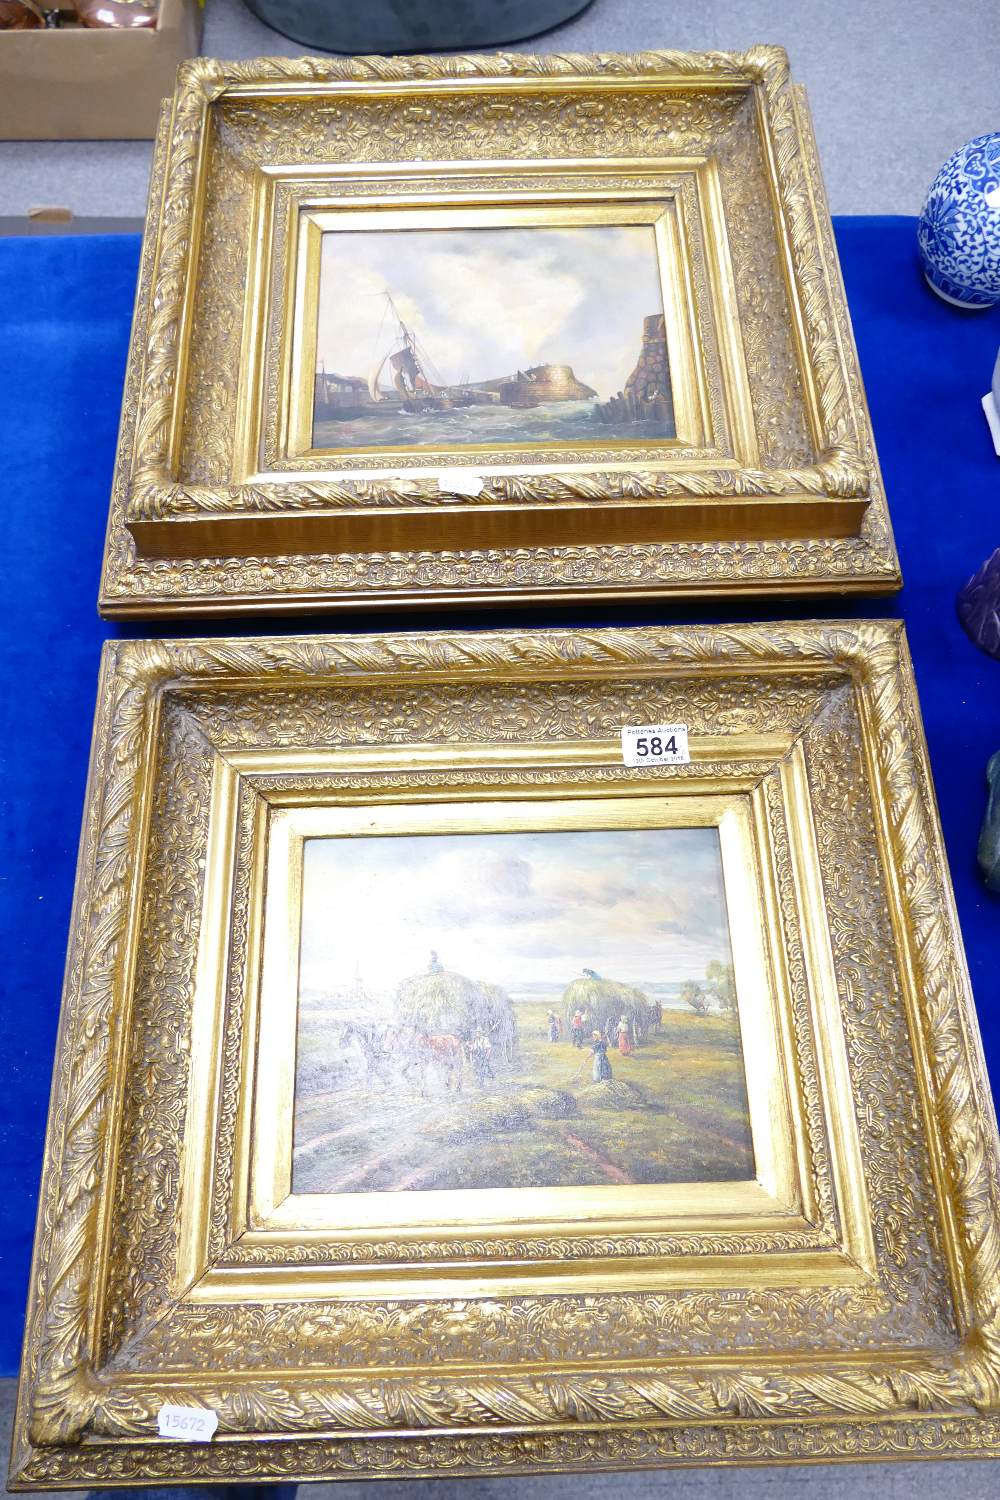 Heavy Gilt gramed 20th century painting with landscape imagery(2)